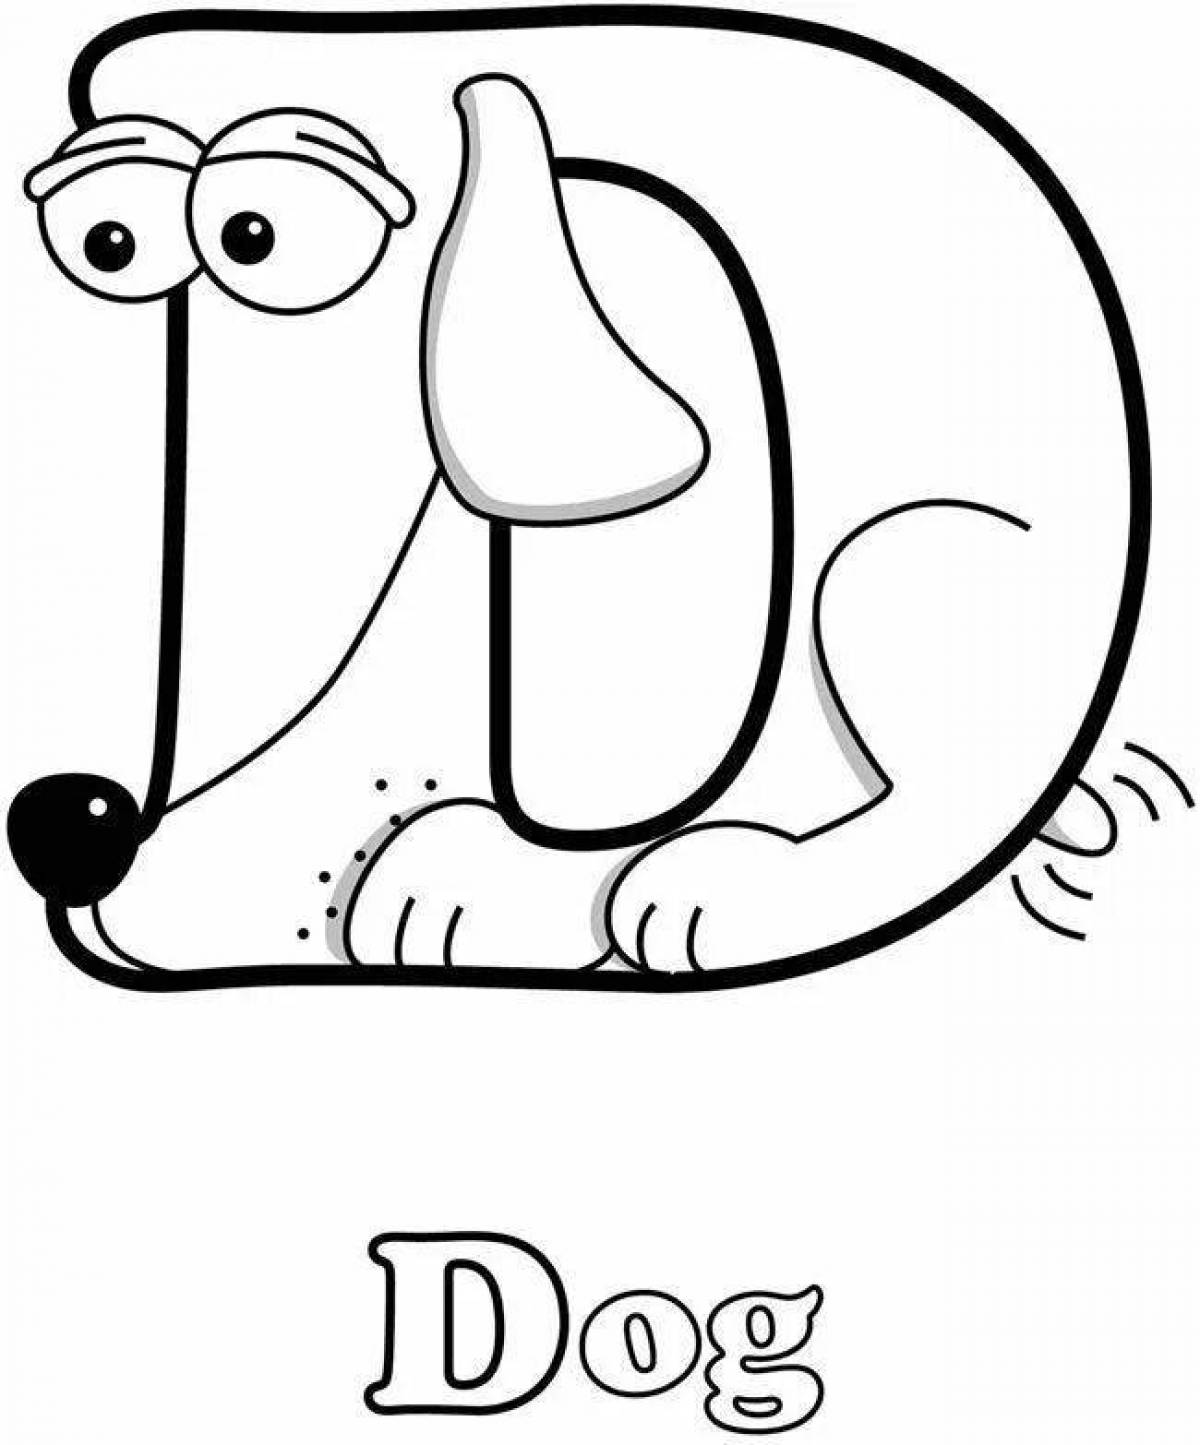 Radiant coloring page english alphabet with eyes